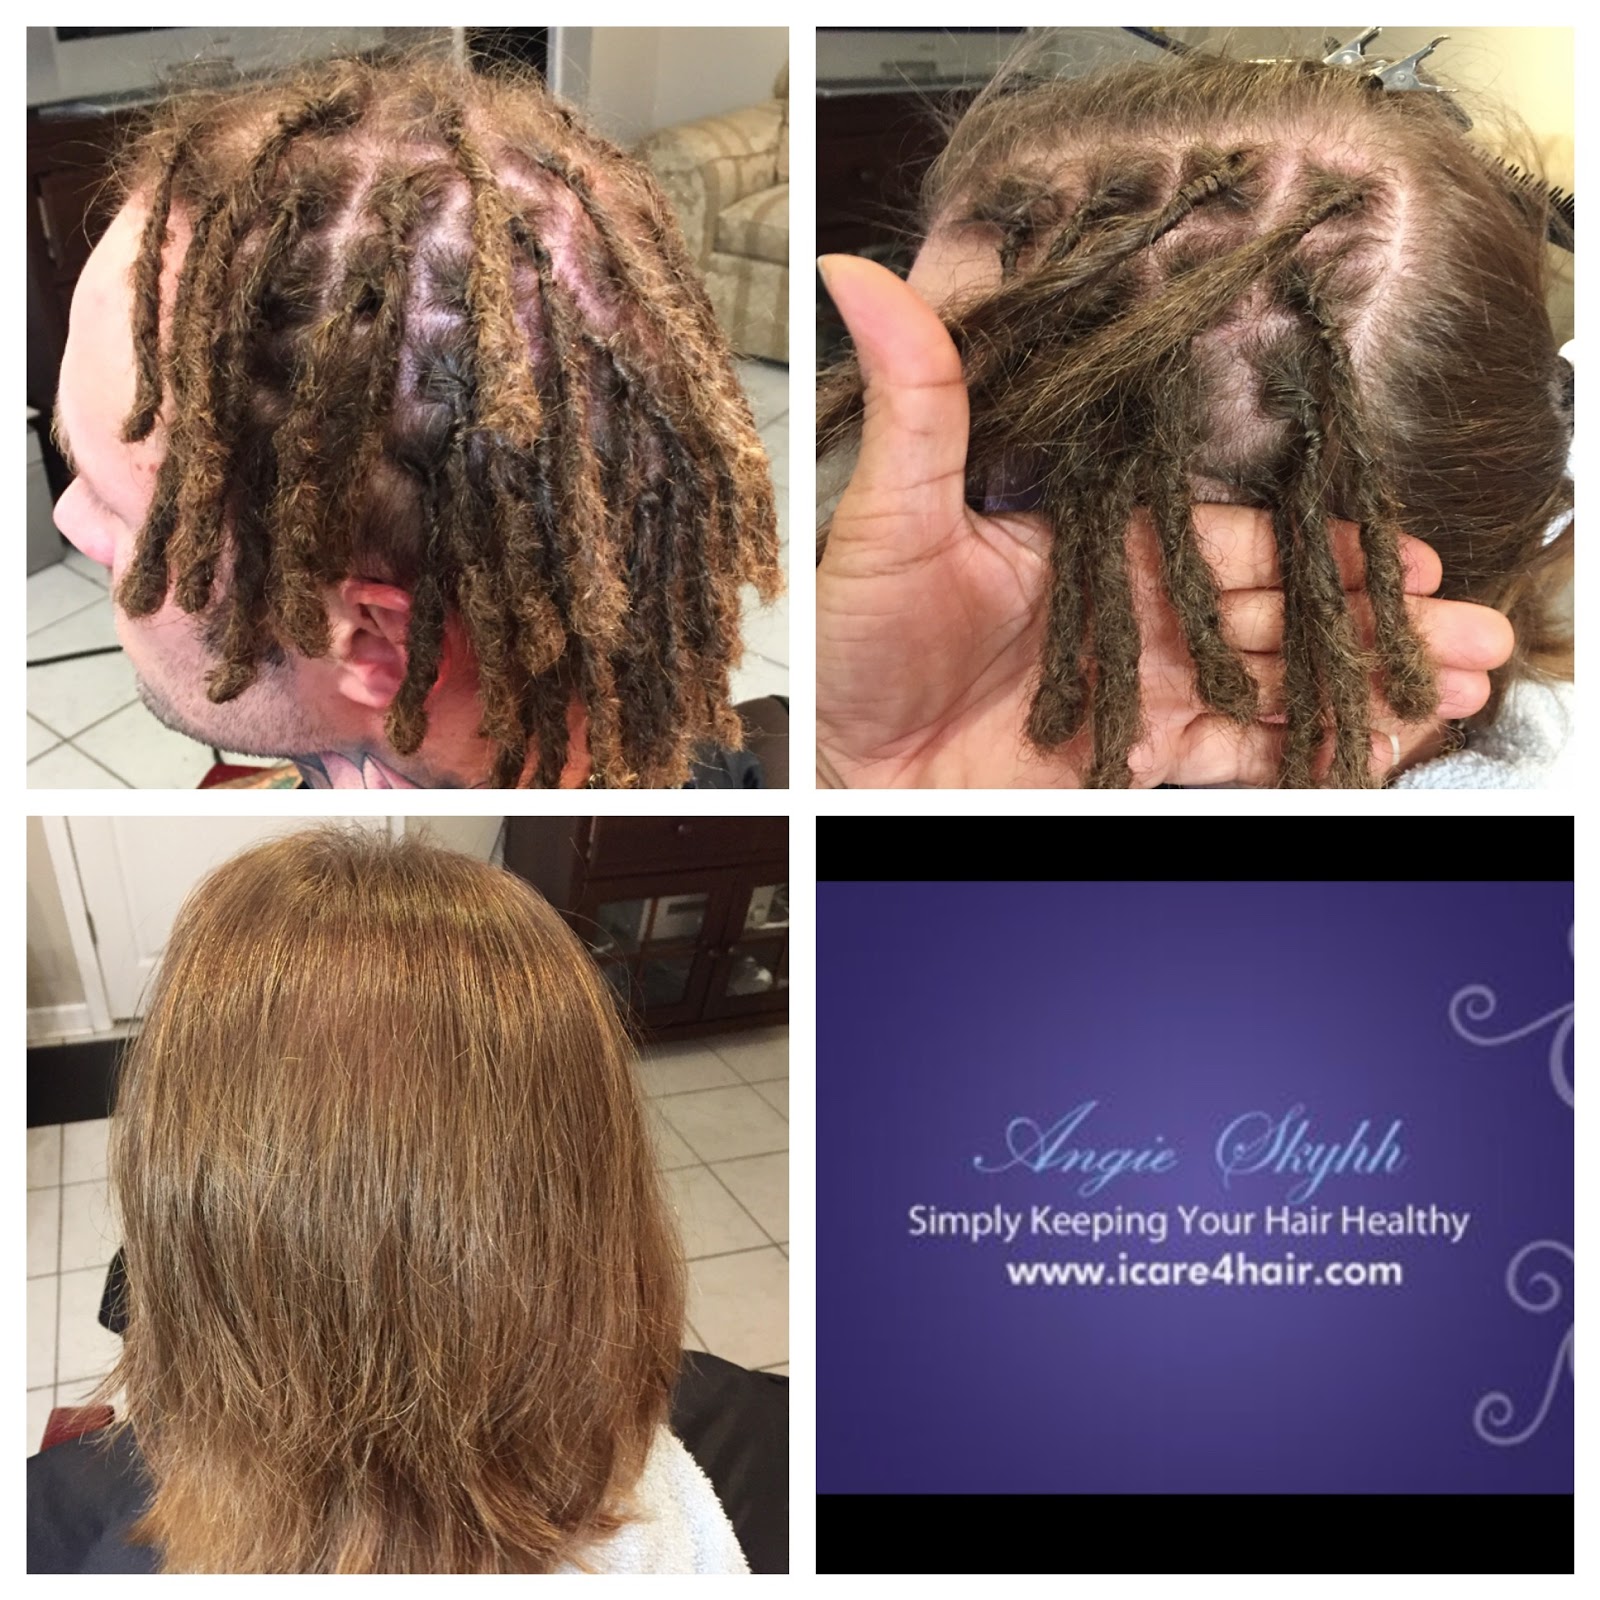 Another part of my instant locs journey: loose hairs! #instantlocs #in